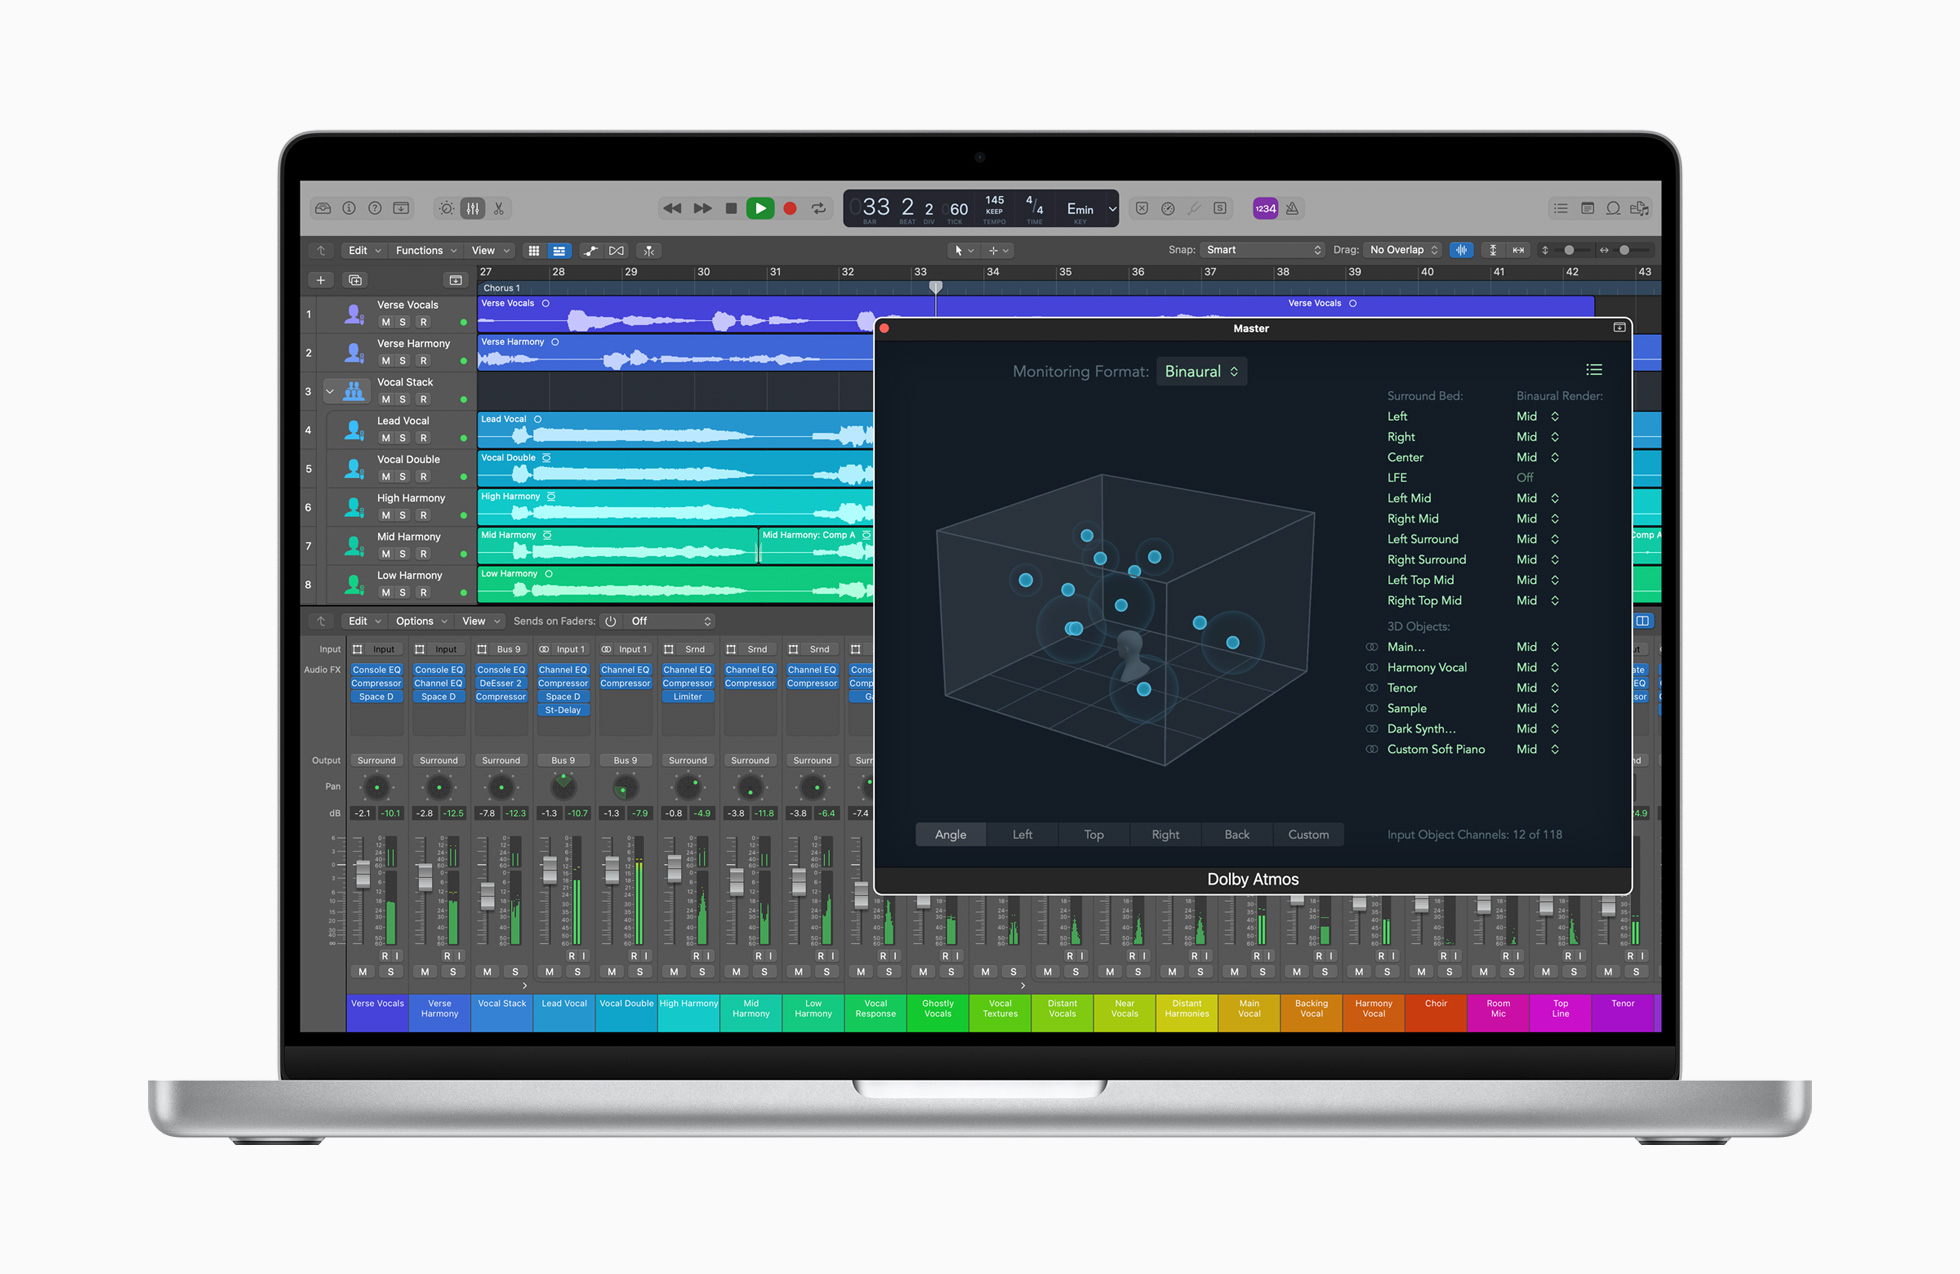 Apple’s Logic Pro update brings new features for creating music in spatial audio and Producer Packs